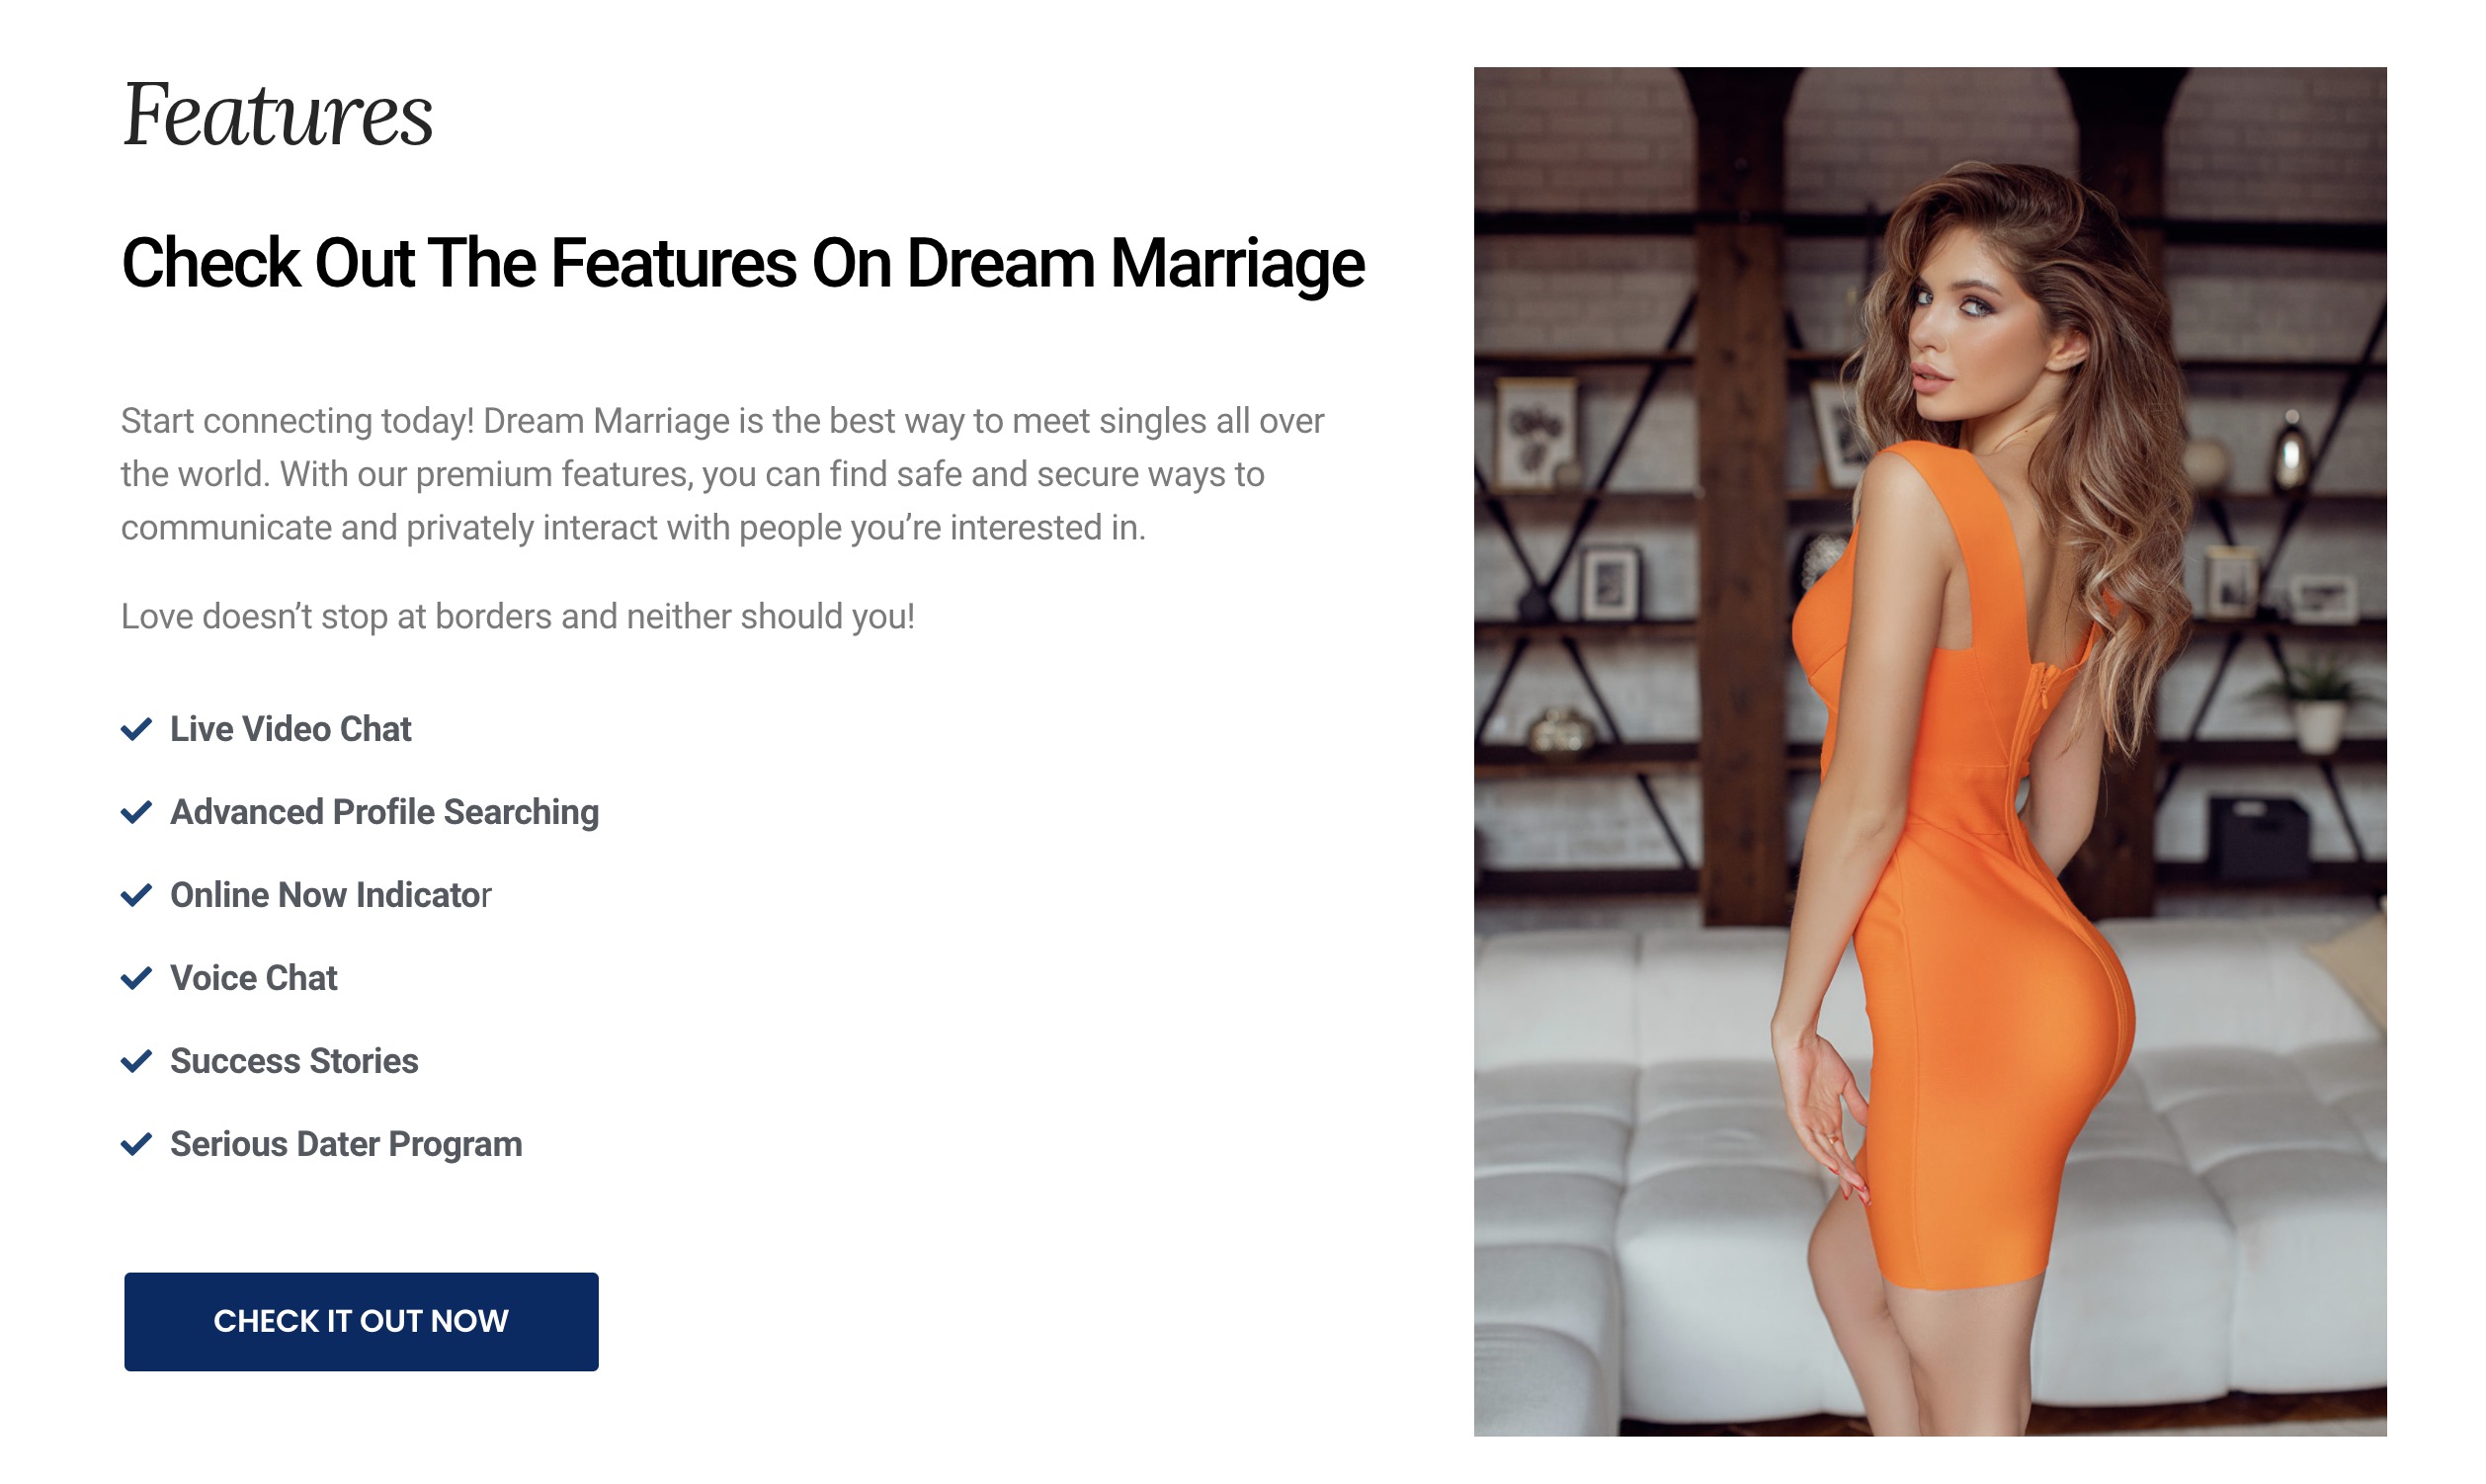 DreamMarriage features